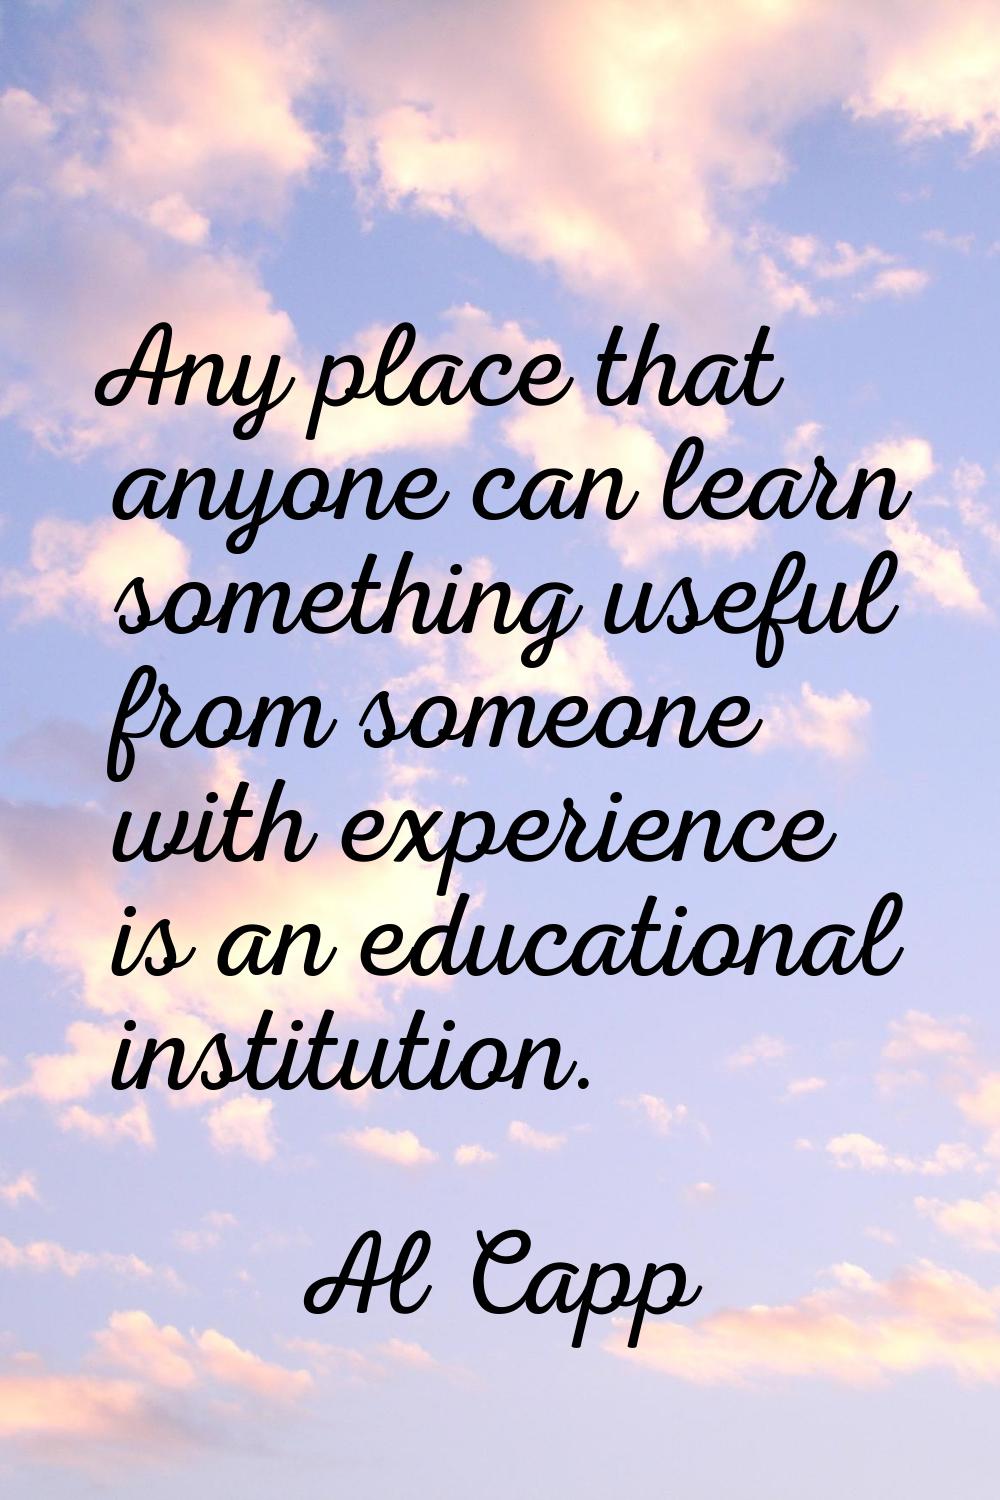 Any place that anyone can learn something useful from someone with experience is an educational ins